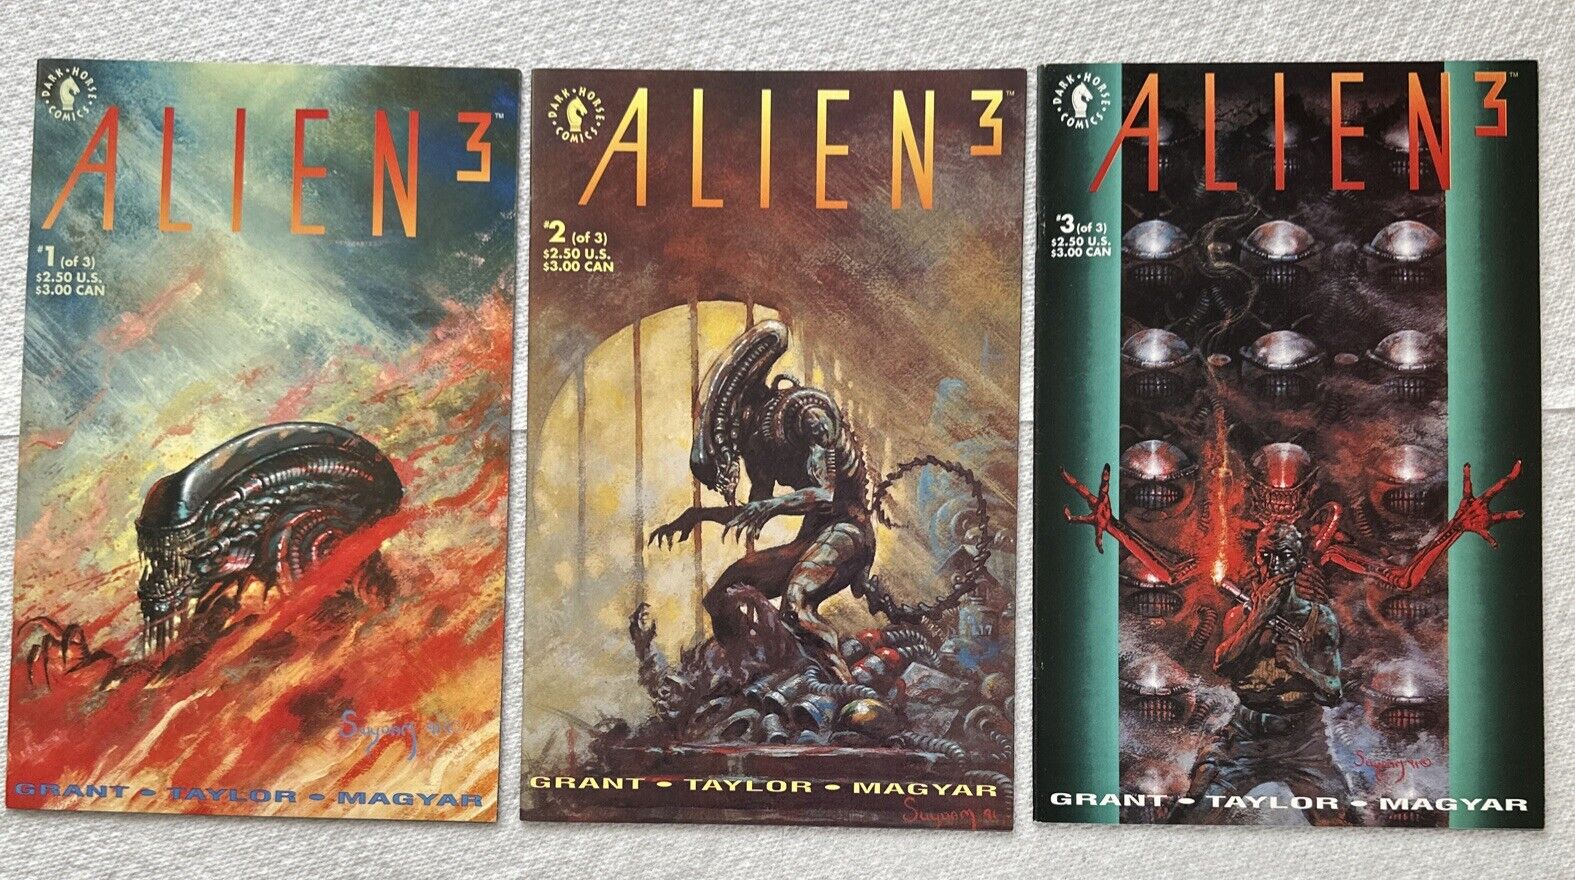 Alien 3 Comic Books lot of 3 (full collection)